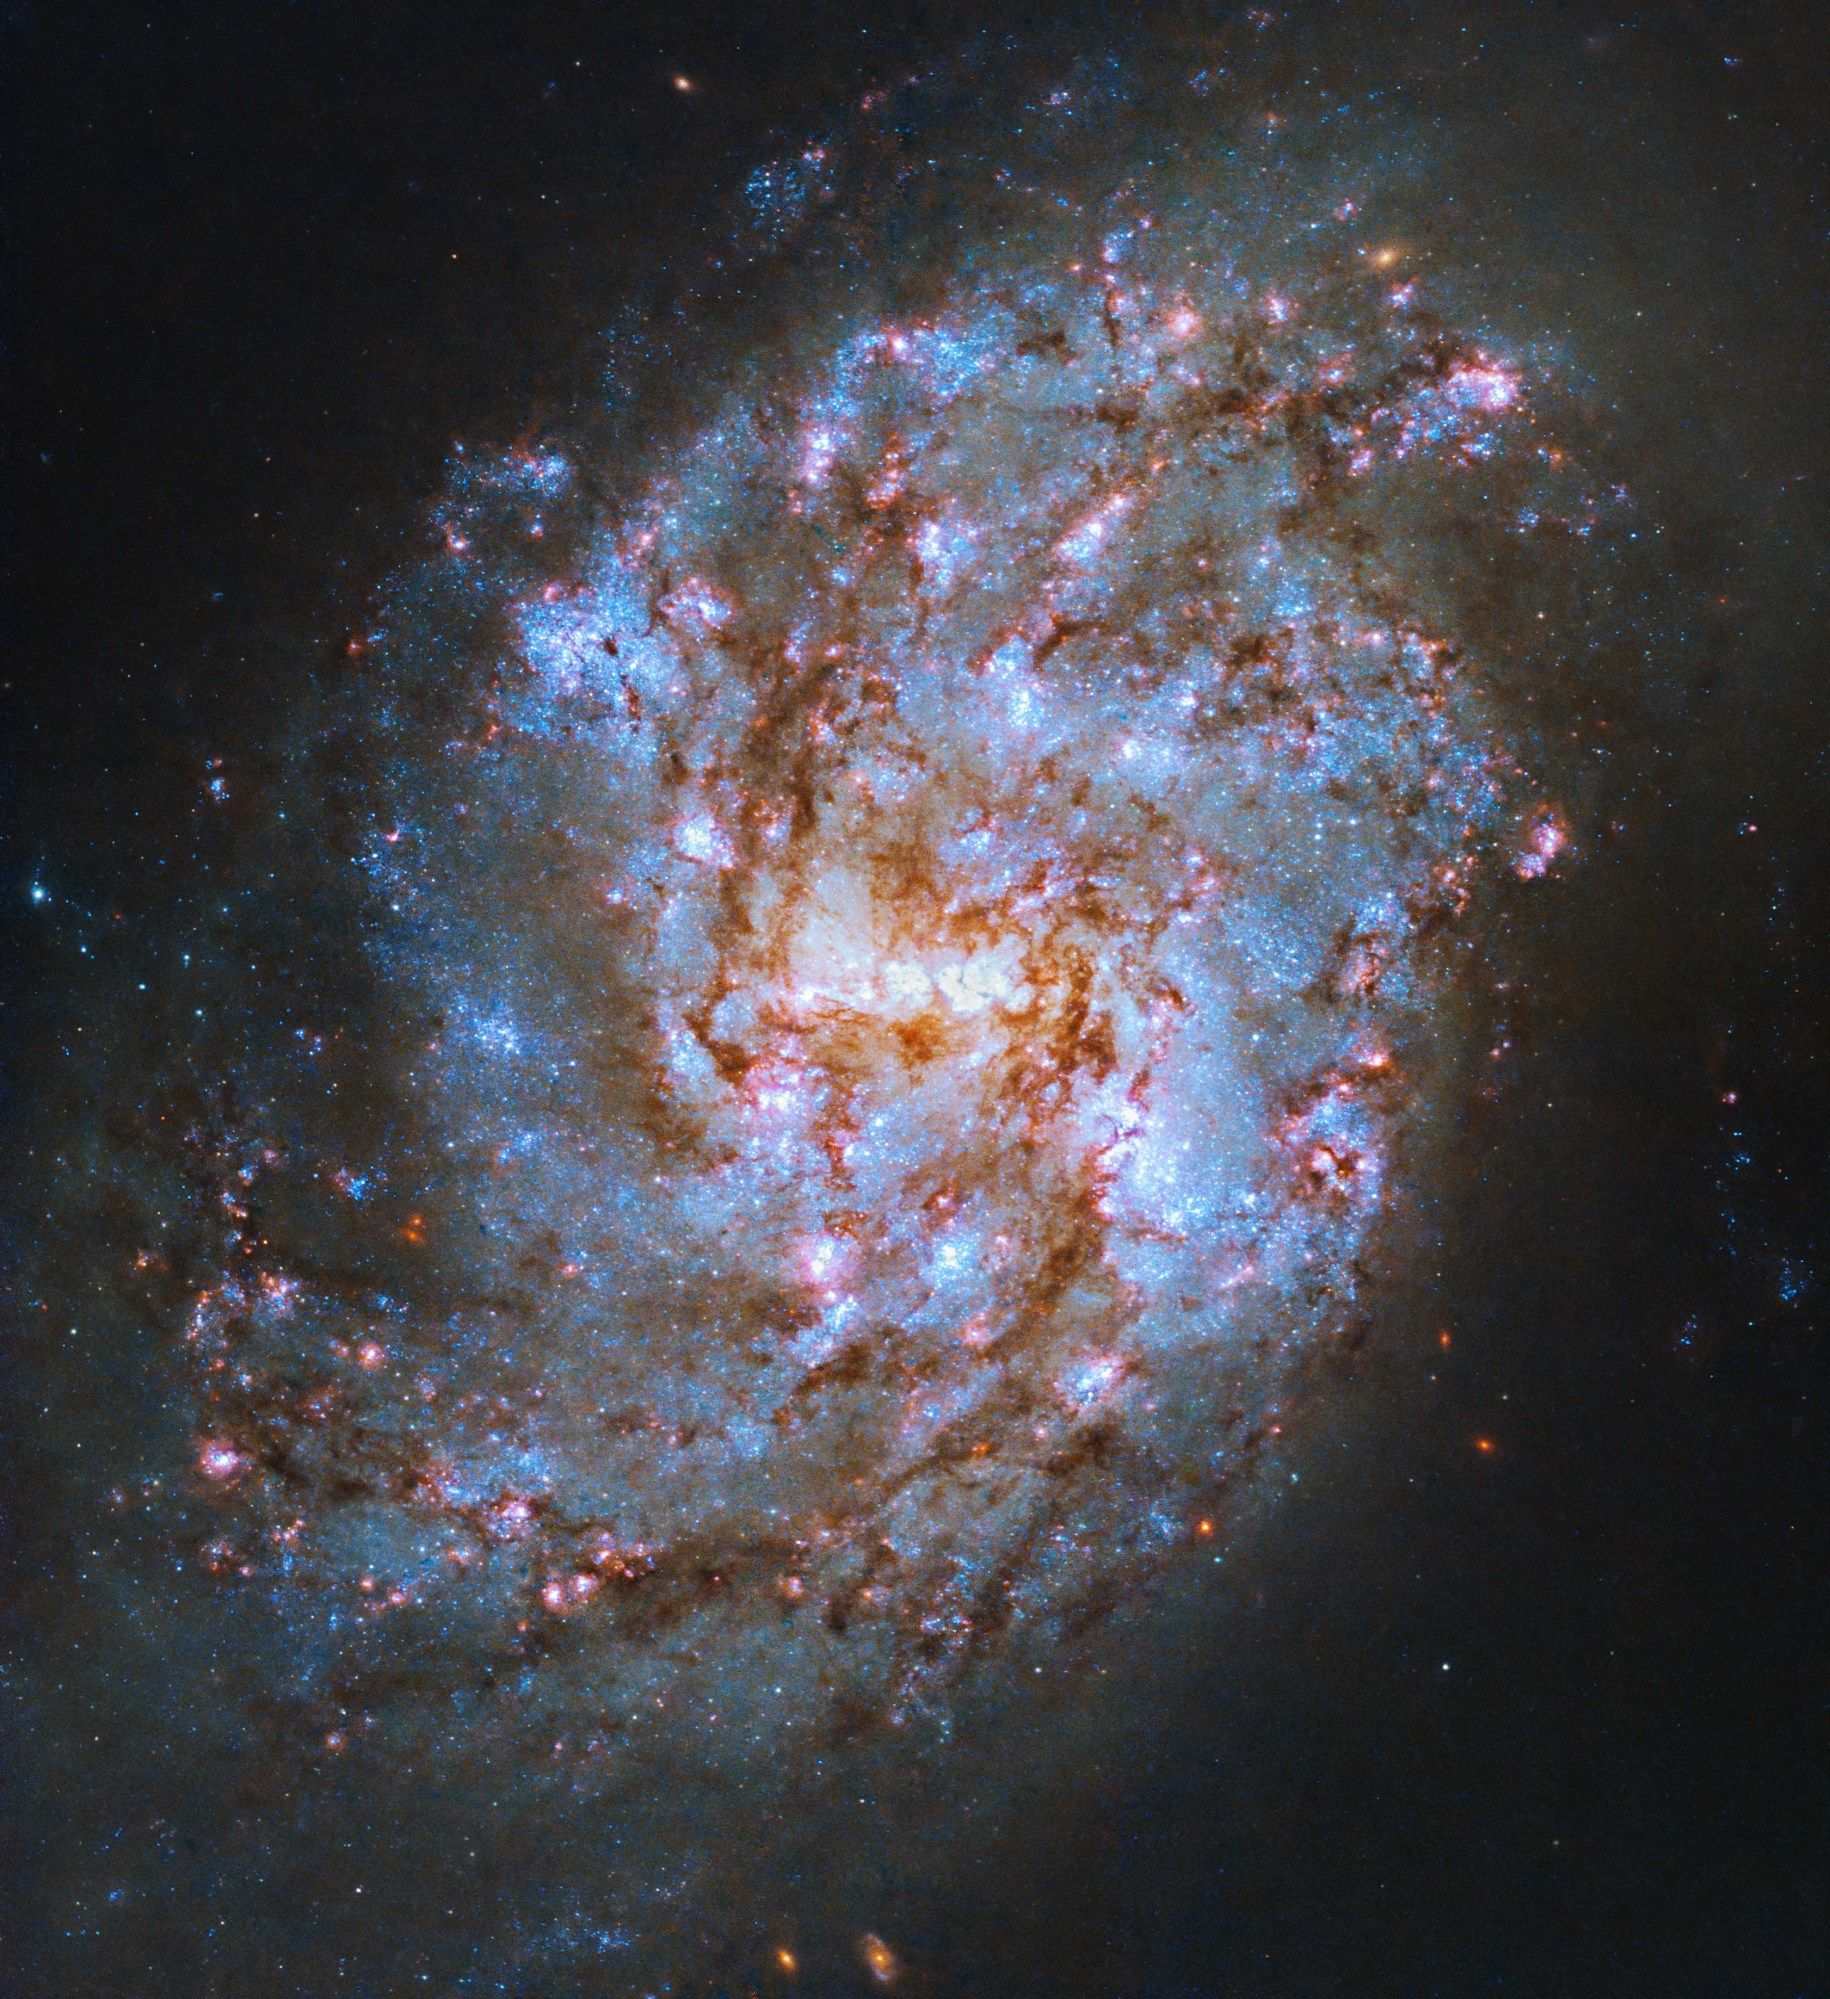 This nearly face-on spiral galaxy has bright blue-white and pink regions outlined by dark, rusty-brown dust lanes. A small, bright-white bar of stars stretches horizontally across the image’s center at the galaxy’s heart.